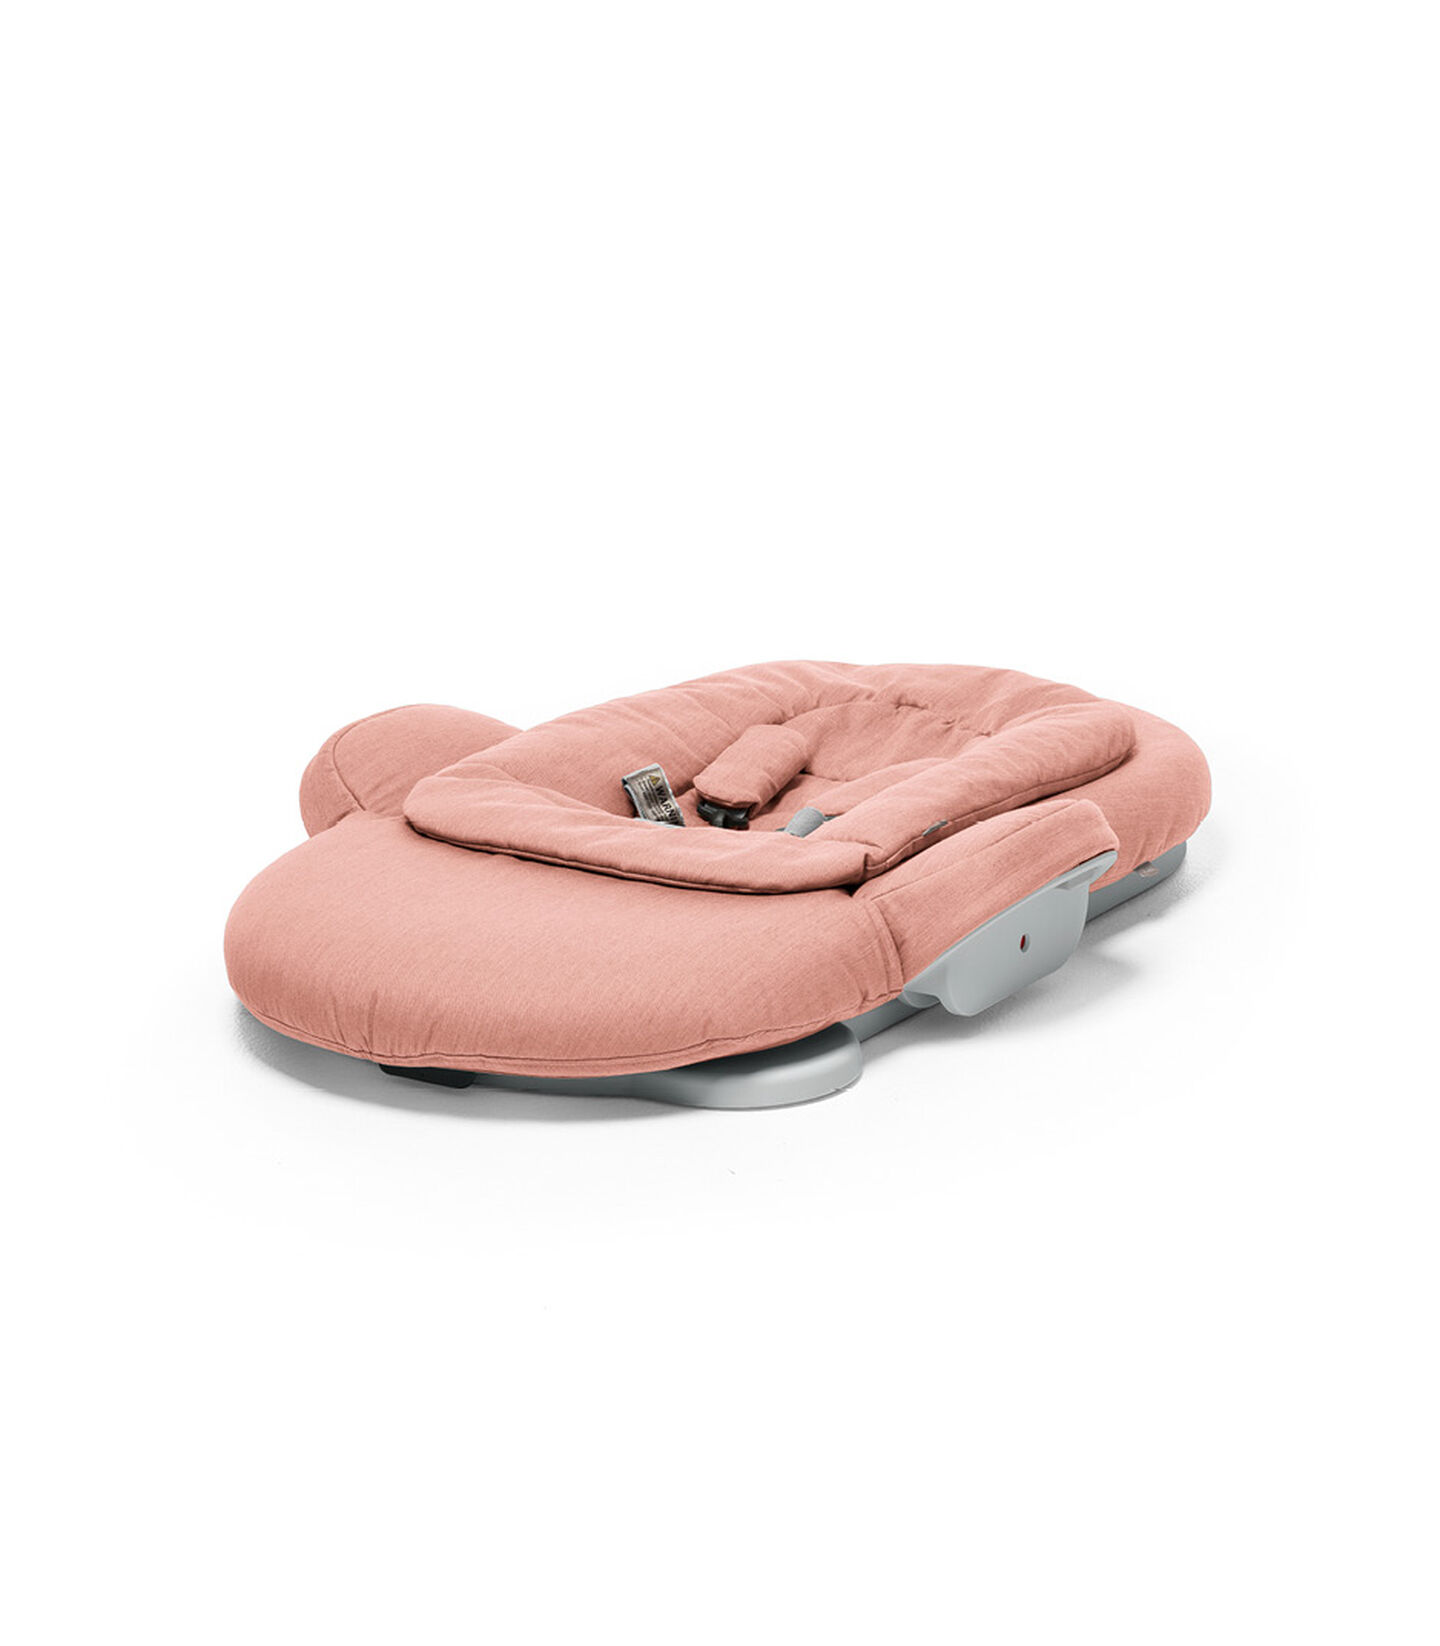 Hamaca Stokke® Steps™ Soft Coral, Soft Coral, mainview view 3